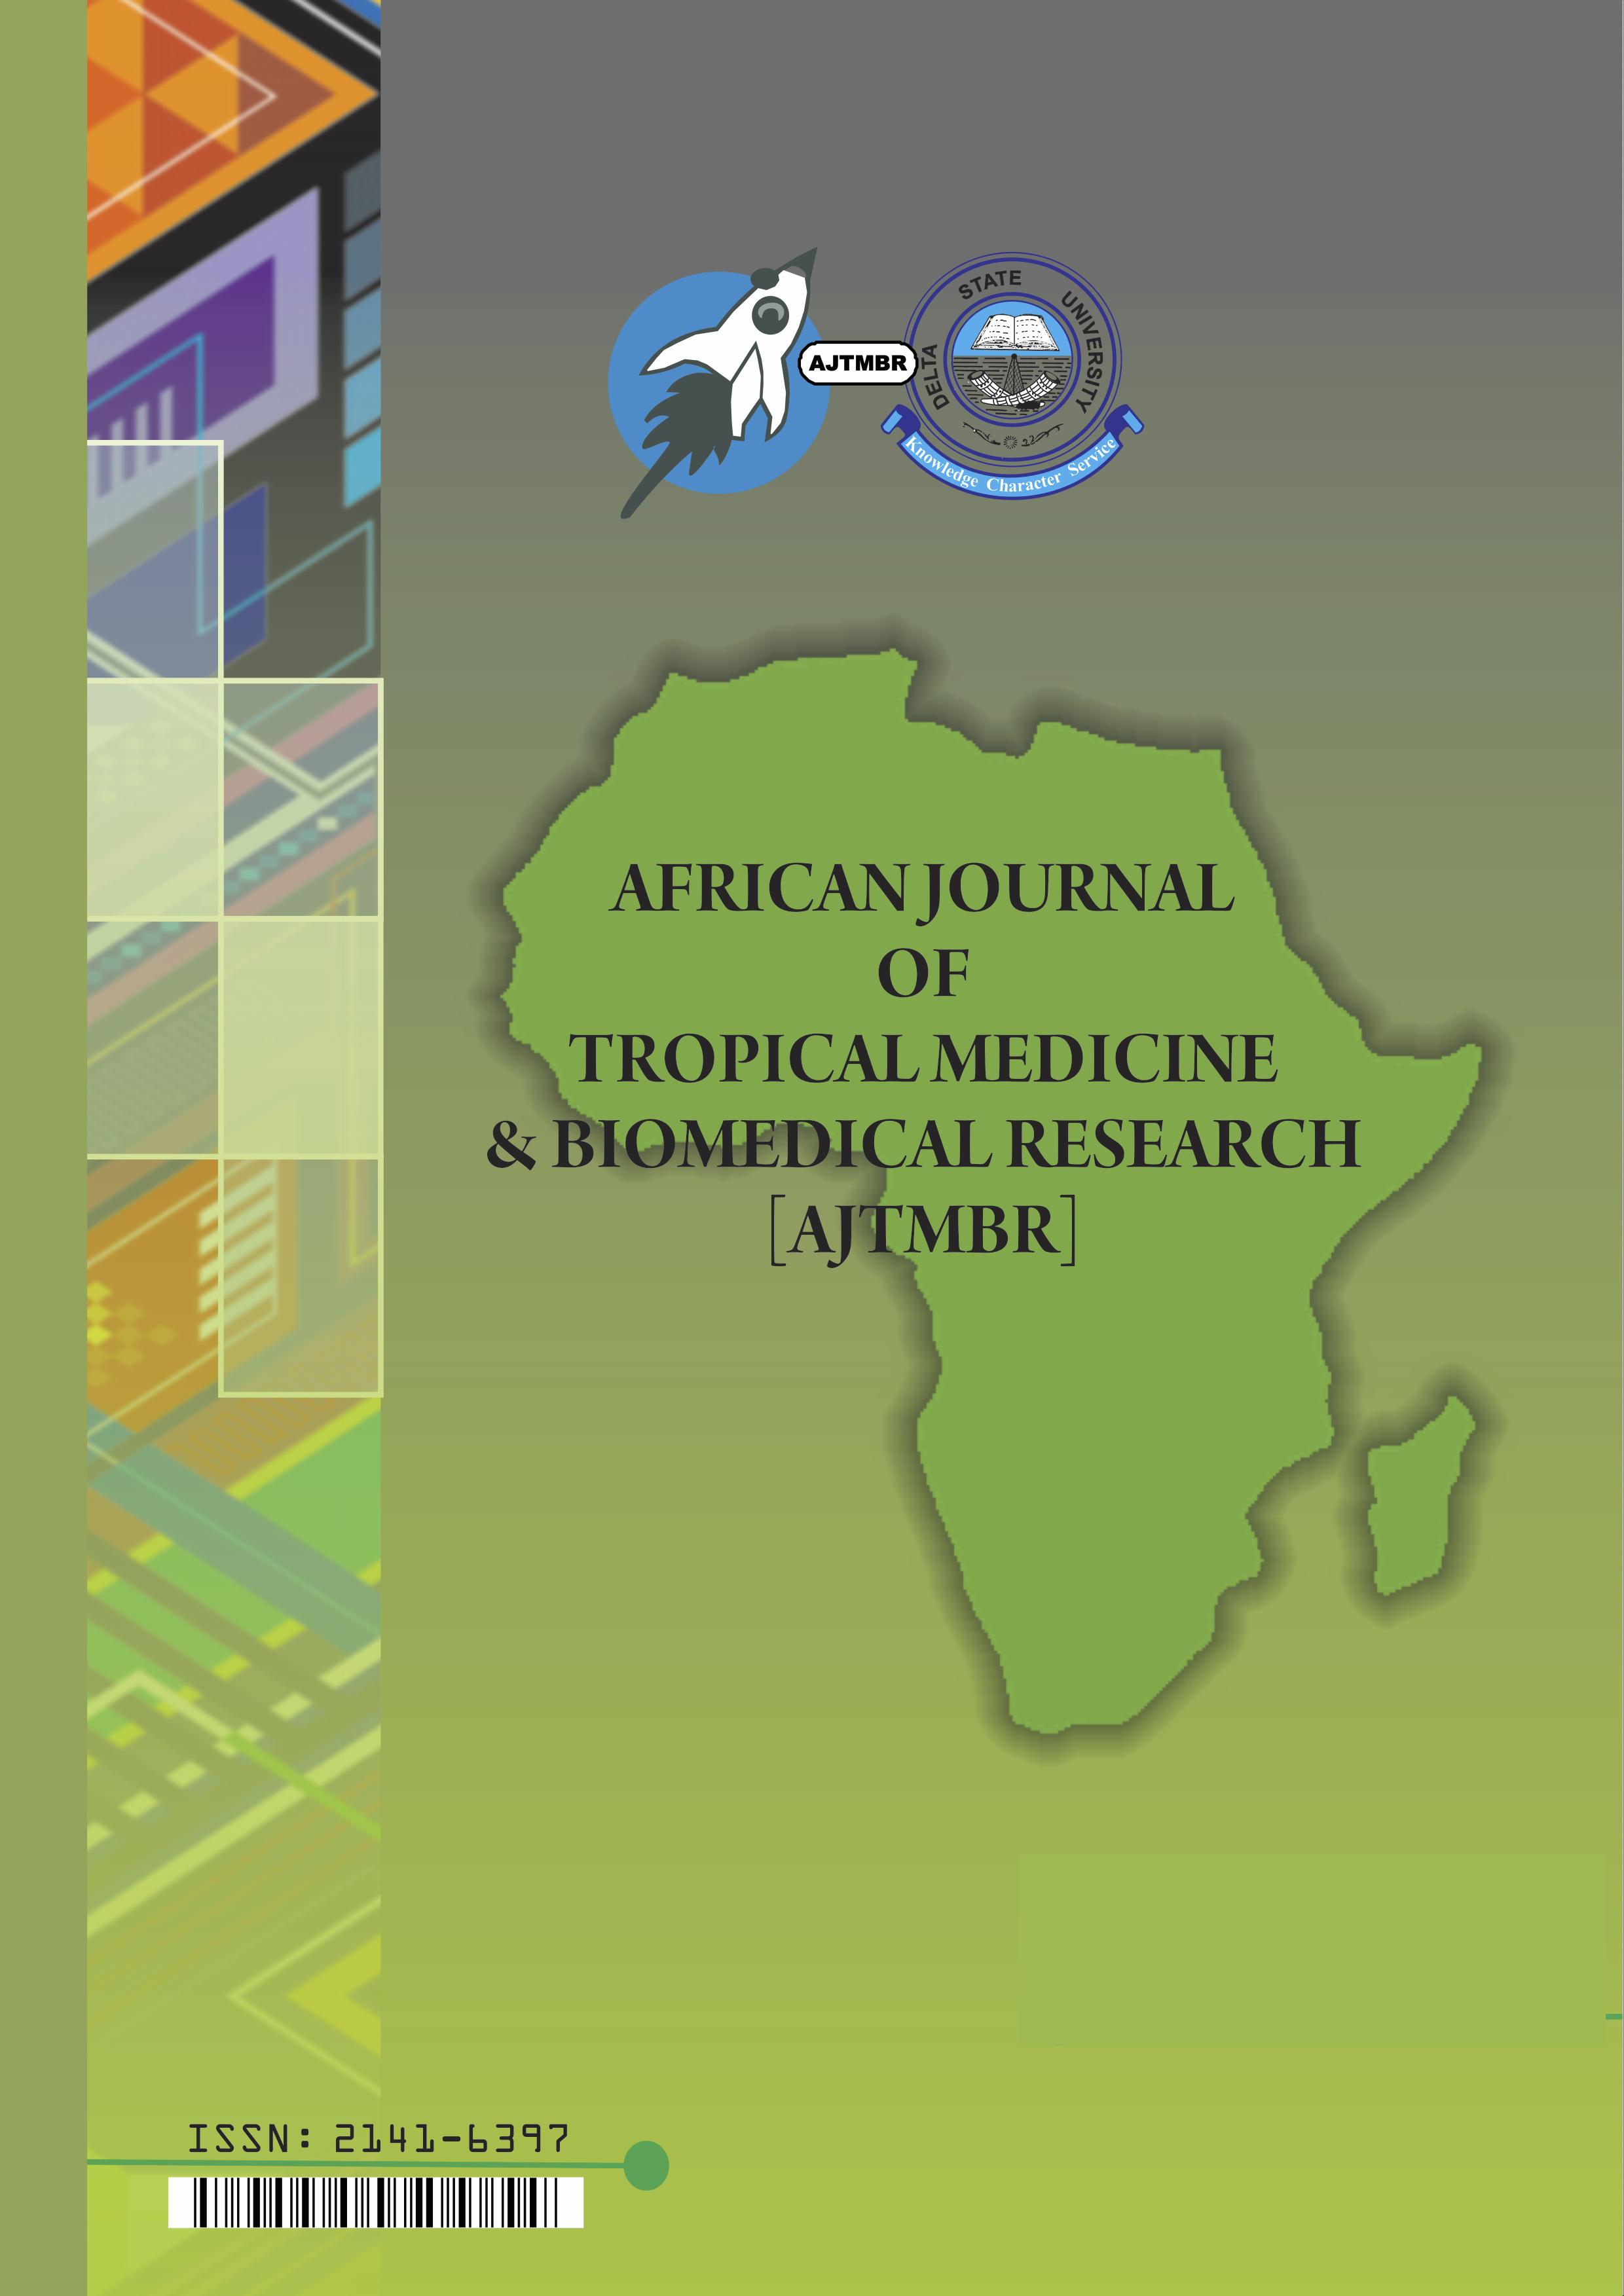 					View Vol. 1 No. 4: African Journal of Tropical Medicine and Biomedical Research; September 2012
				